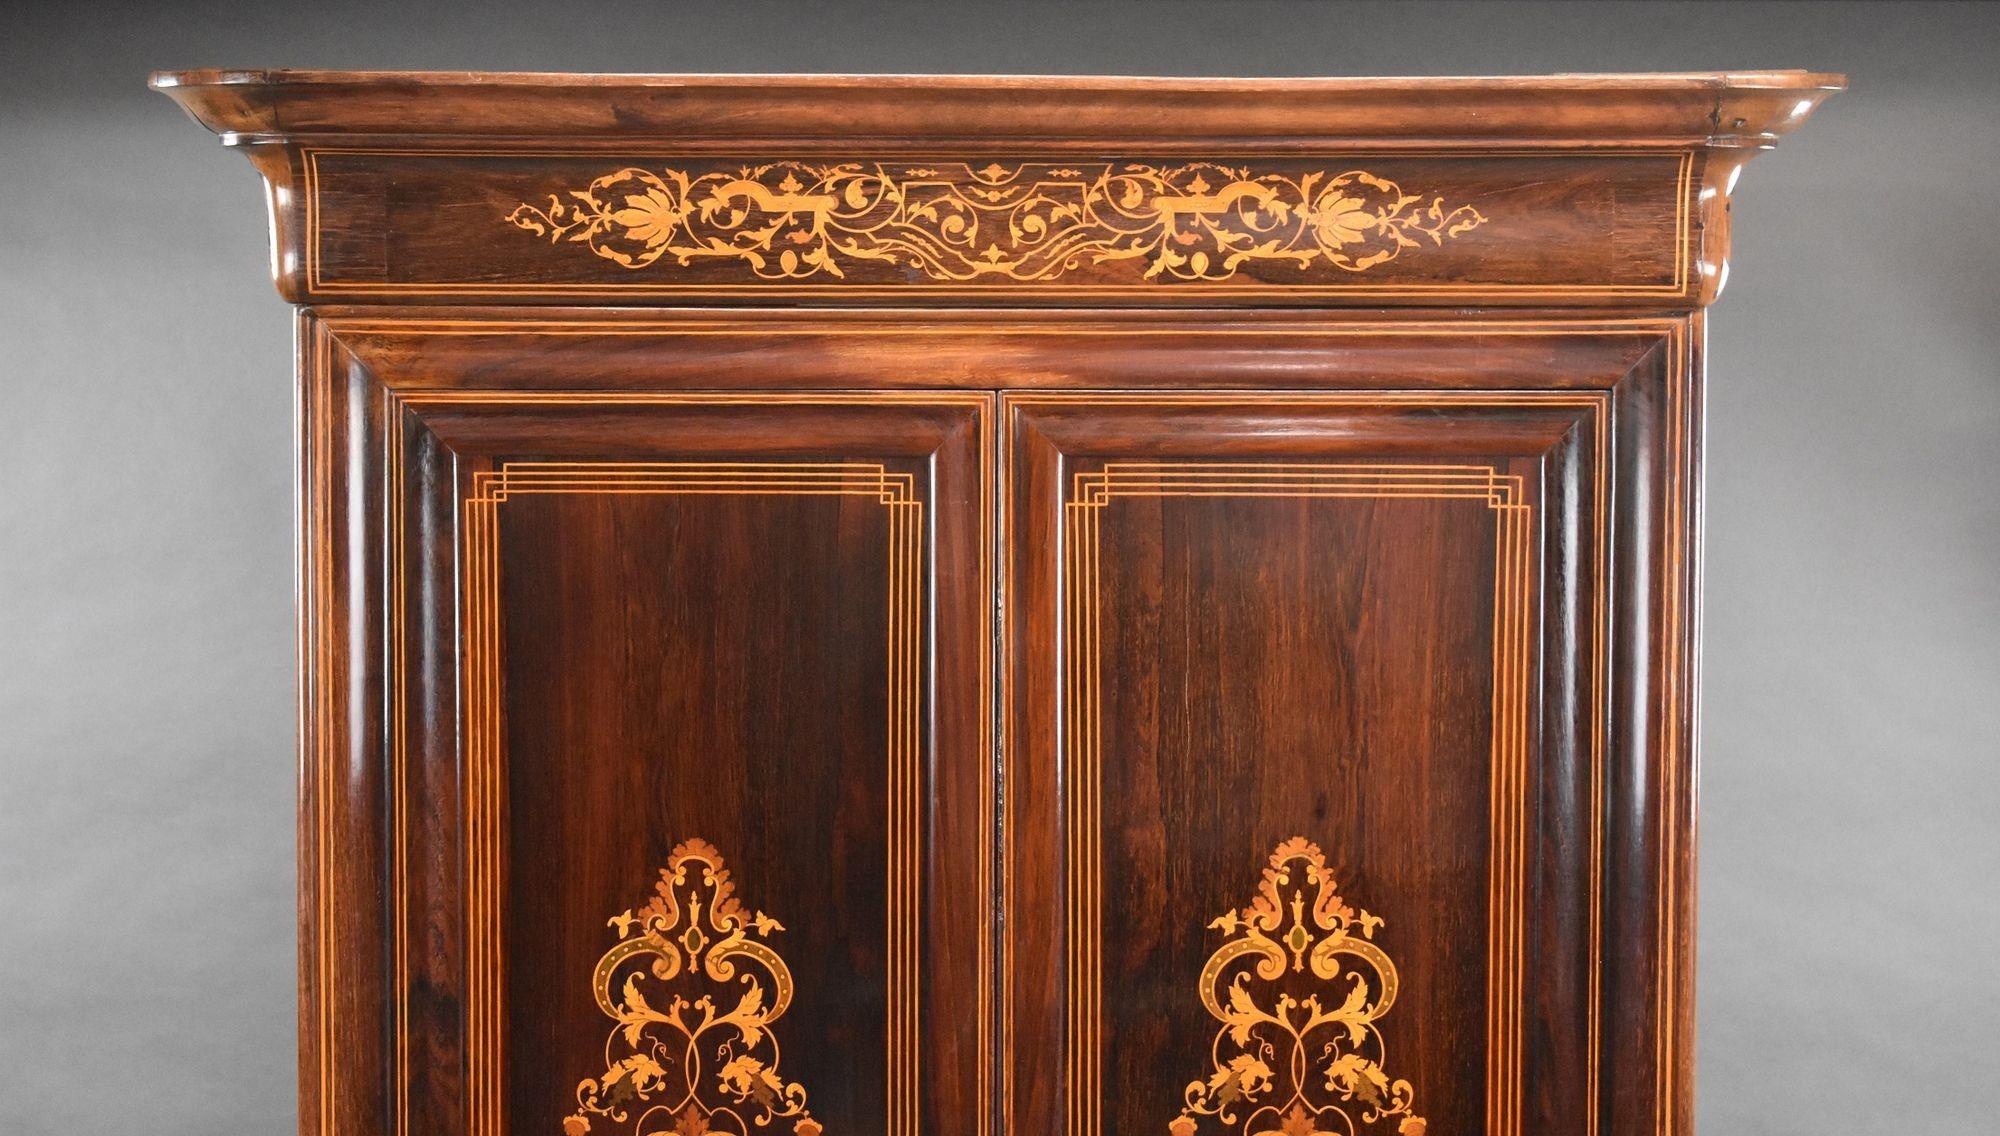 19th Century continental rosewood inlaid wardrobe with profusely inlaid cornice top with double doors each with decorative inlay, when opened reveals a single hanging rail below this has one inlaid drawer with key and a secret drawer below, stands